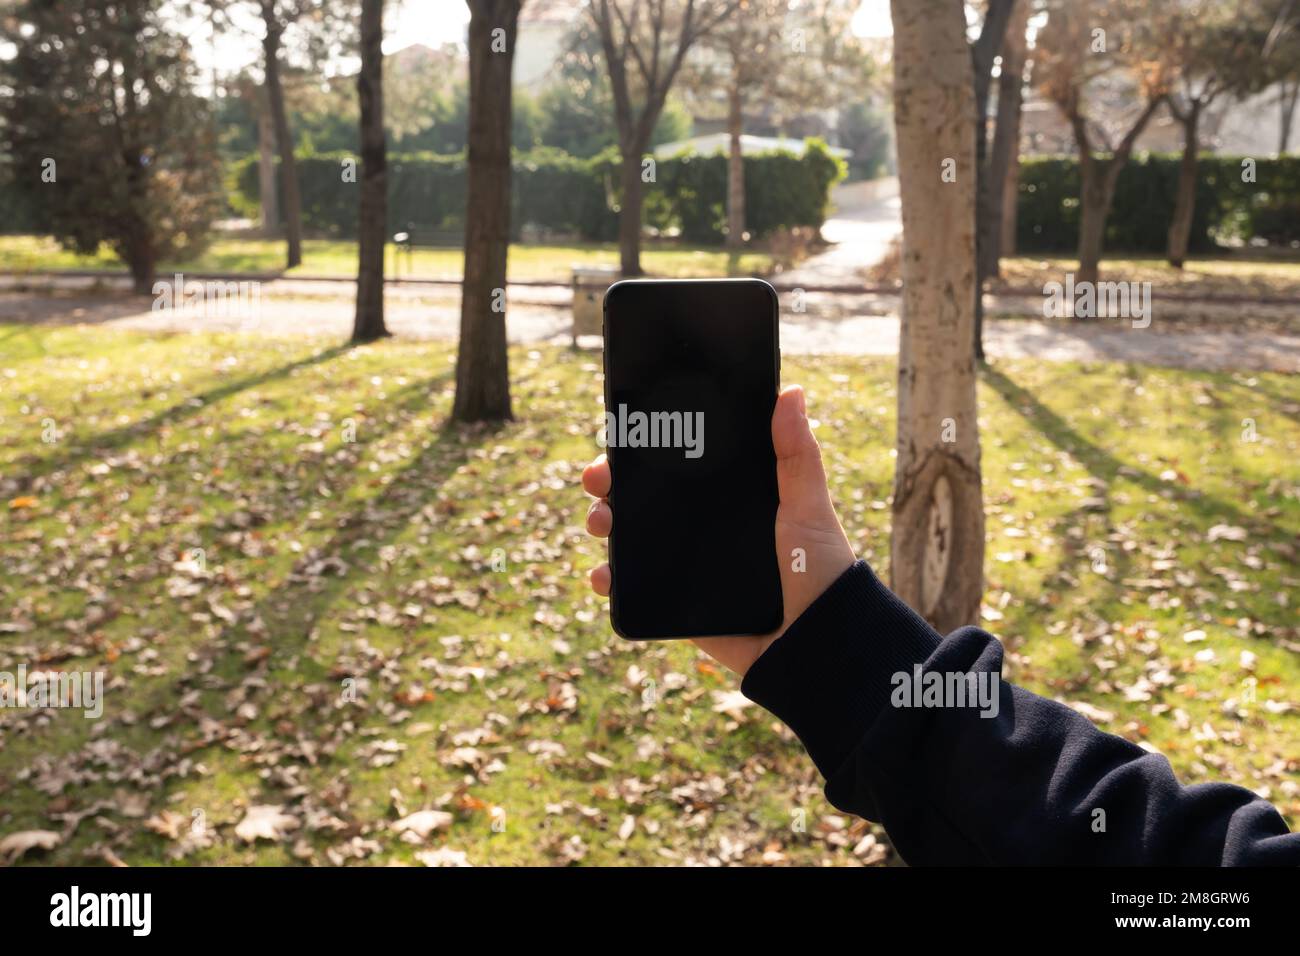 Holding smartphone. Showing black empty screen for mock up. Outdoor at the park on autumn. Application, web page, video call, recommendation concept. Stock Photo